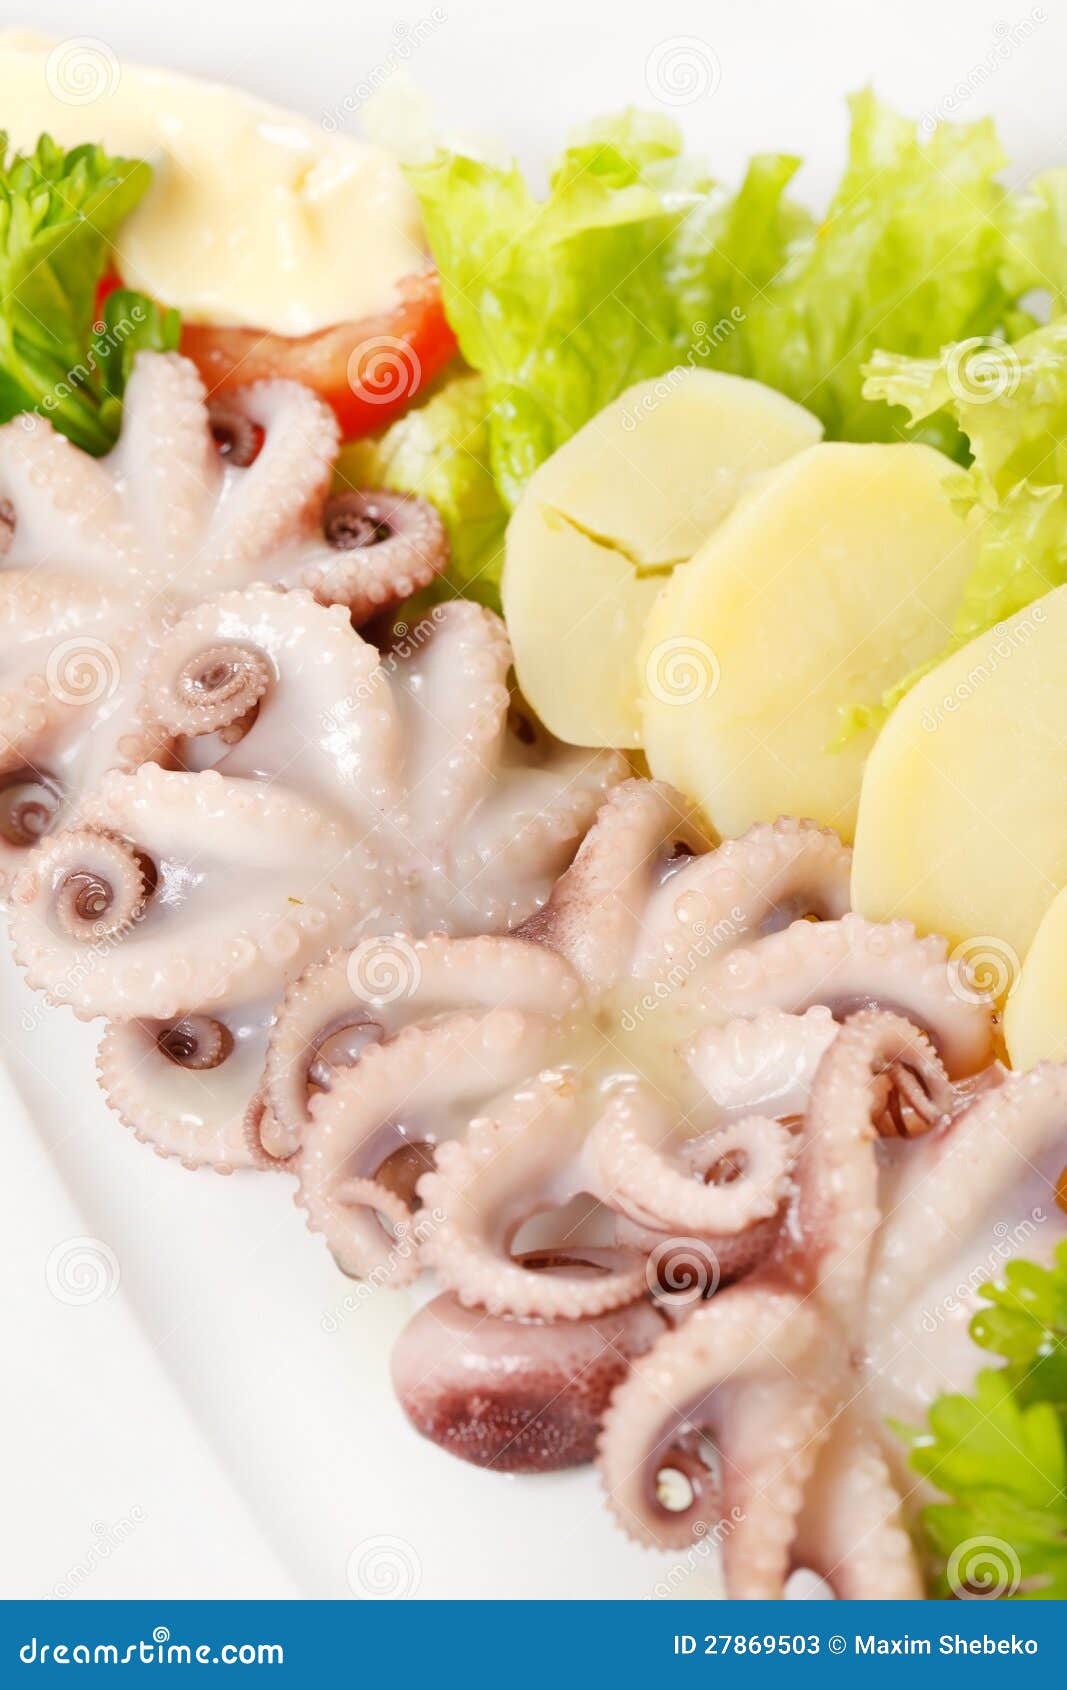 Octopus with potatoes stock image. Image of pepper, lettuce - 27869503